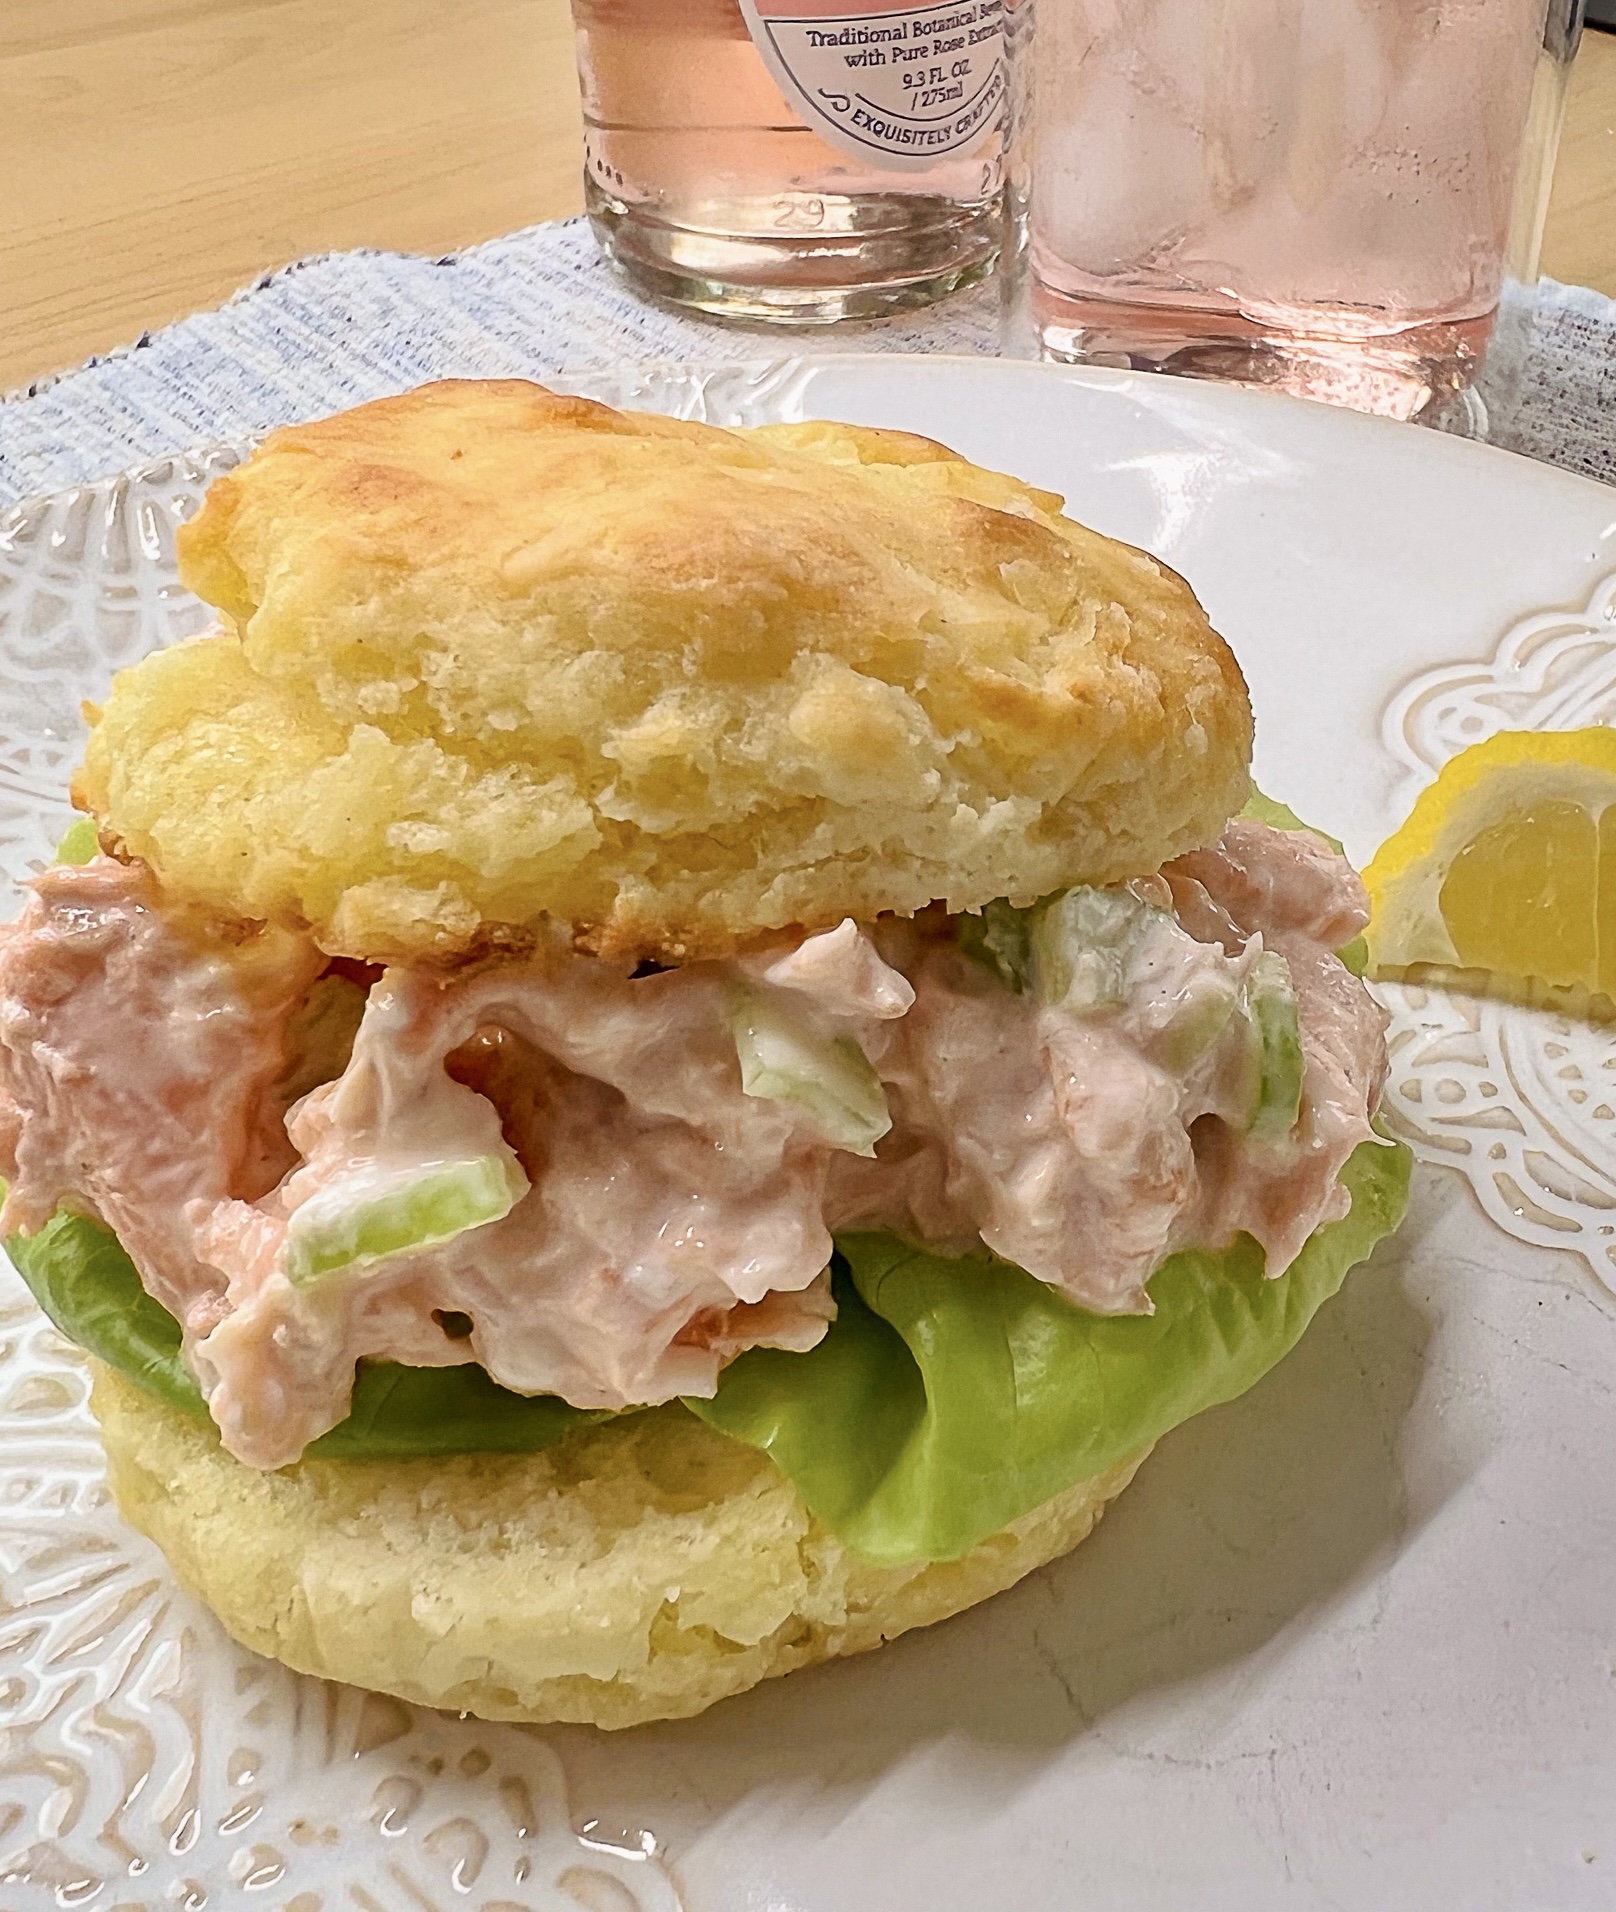 salmon salad on a buttermilk biscuit with bibb lettuce sitting on a scalloped decorated cream-colored plate, wedge of lemon to the right, pink lemonade over ice in a tall clear glass.